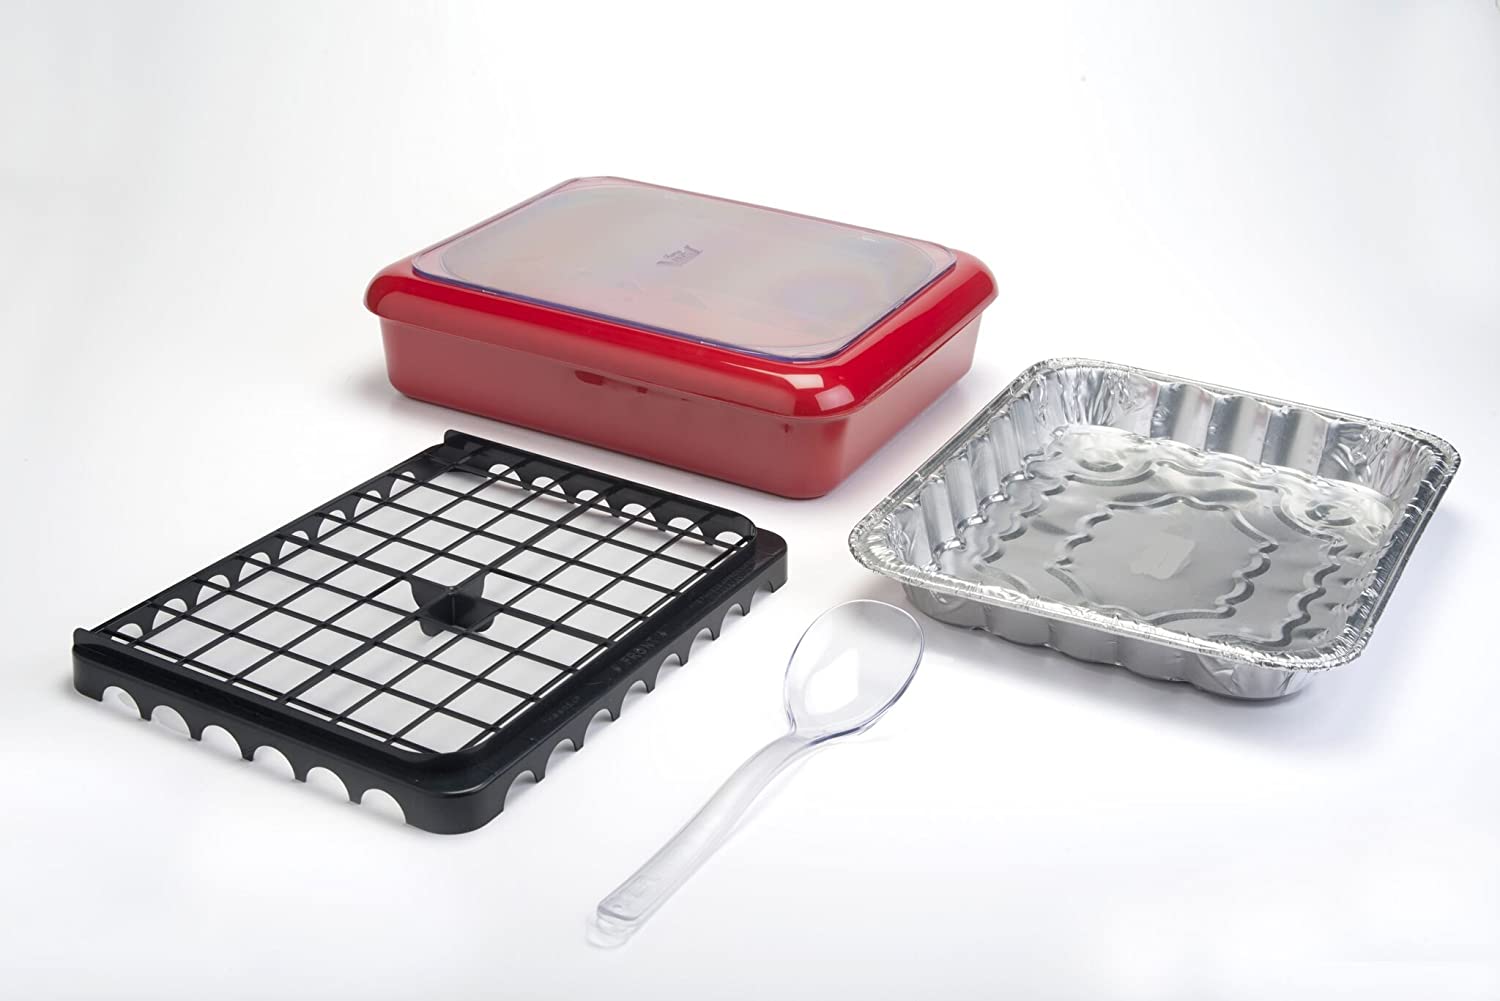 Buy Fancy Panz - 2 in 1 Foil Pan Carrier or Egg Tray by Fancy Panz